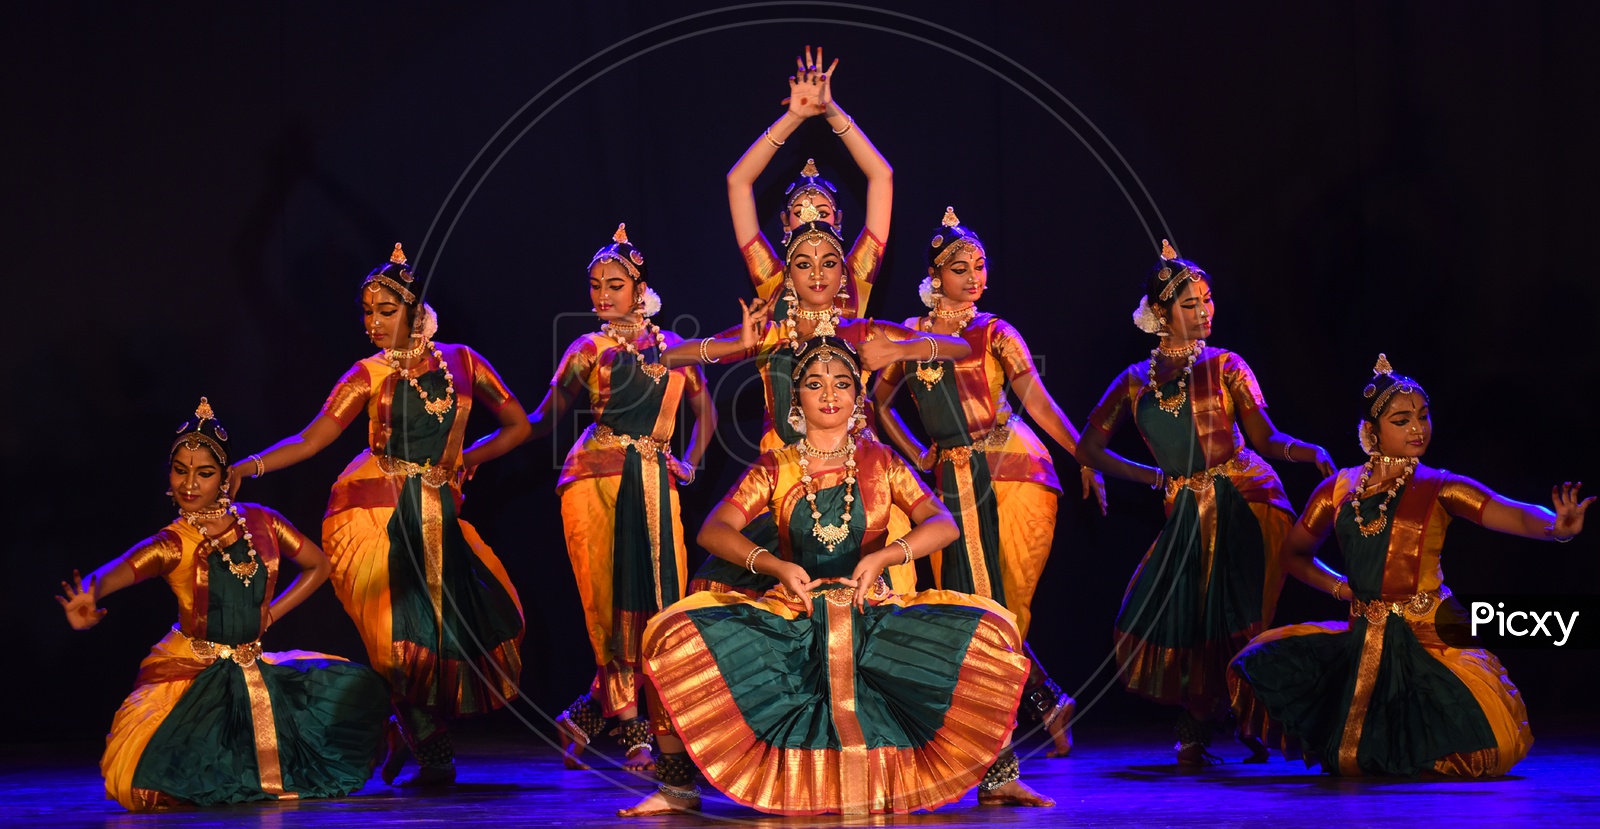 An Odissi dance festival in Bengaluru | Events Movie News - Times of India